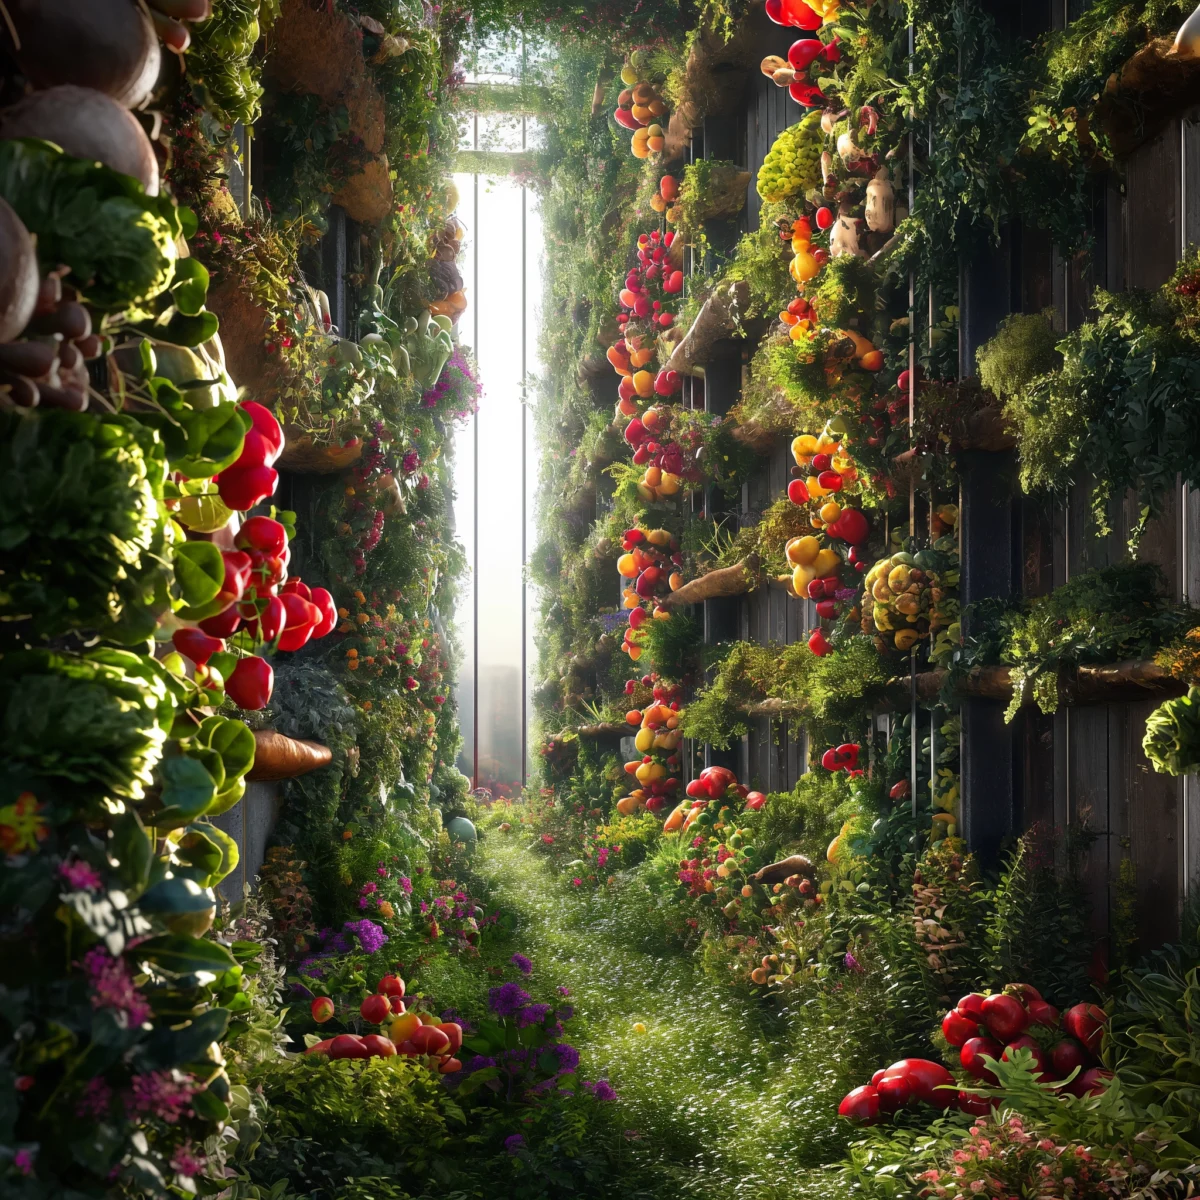 How To Start Vertical Farming